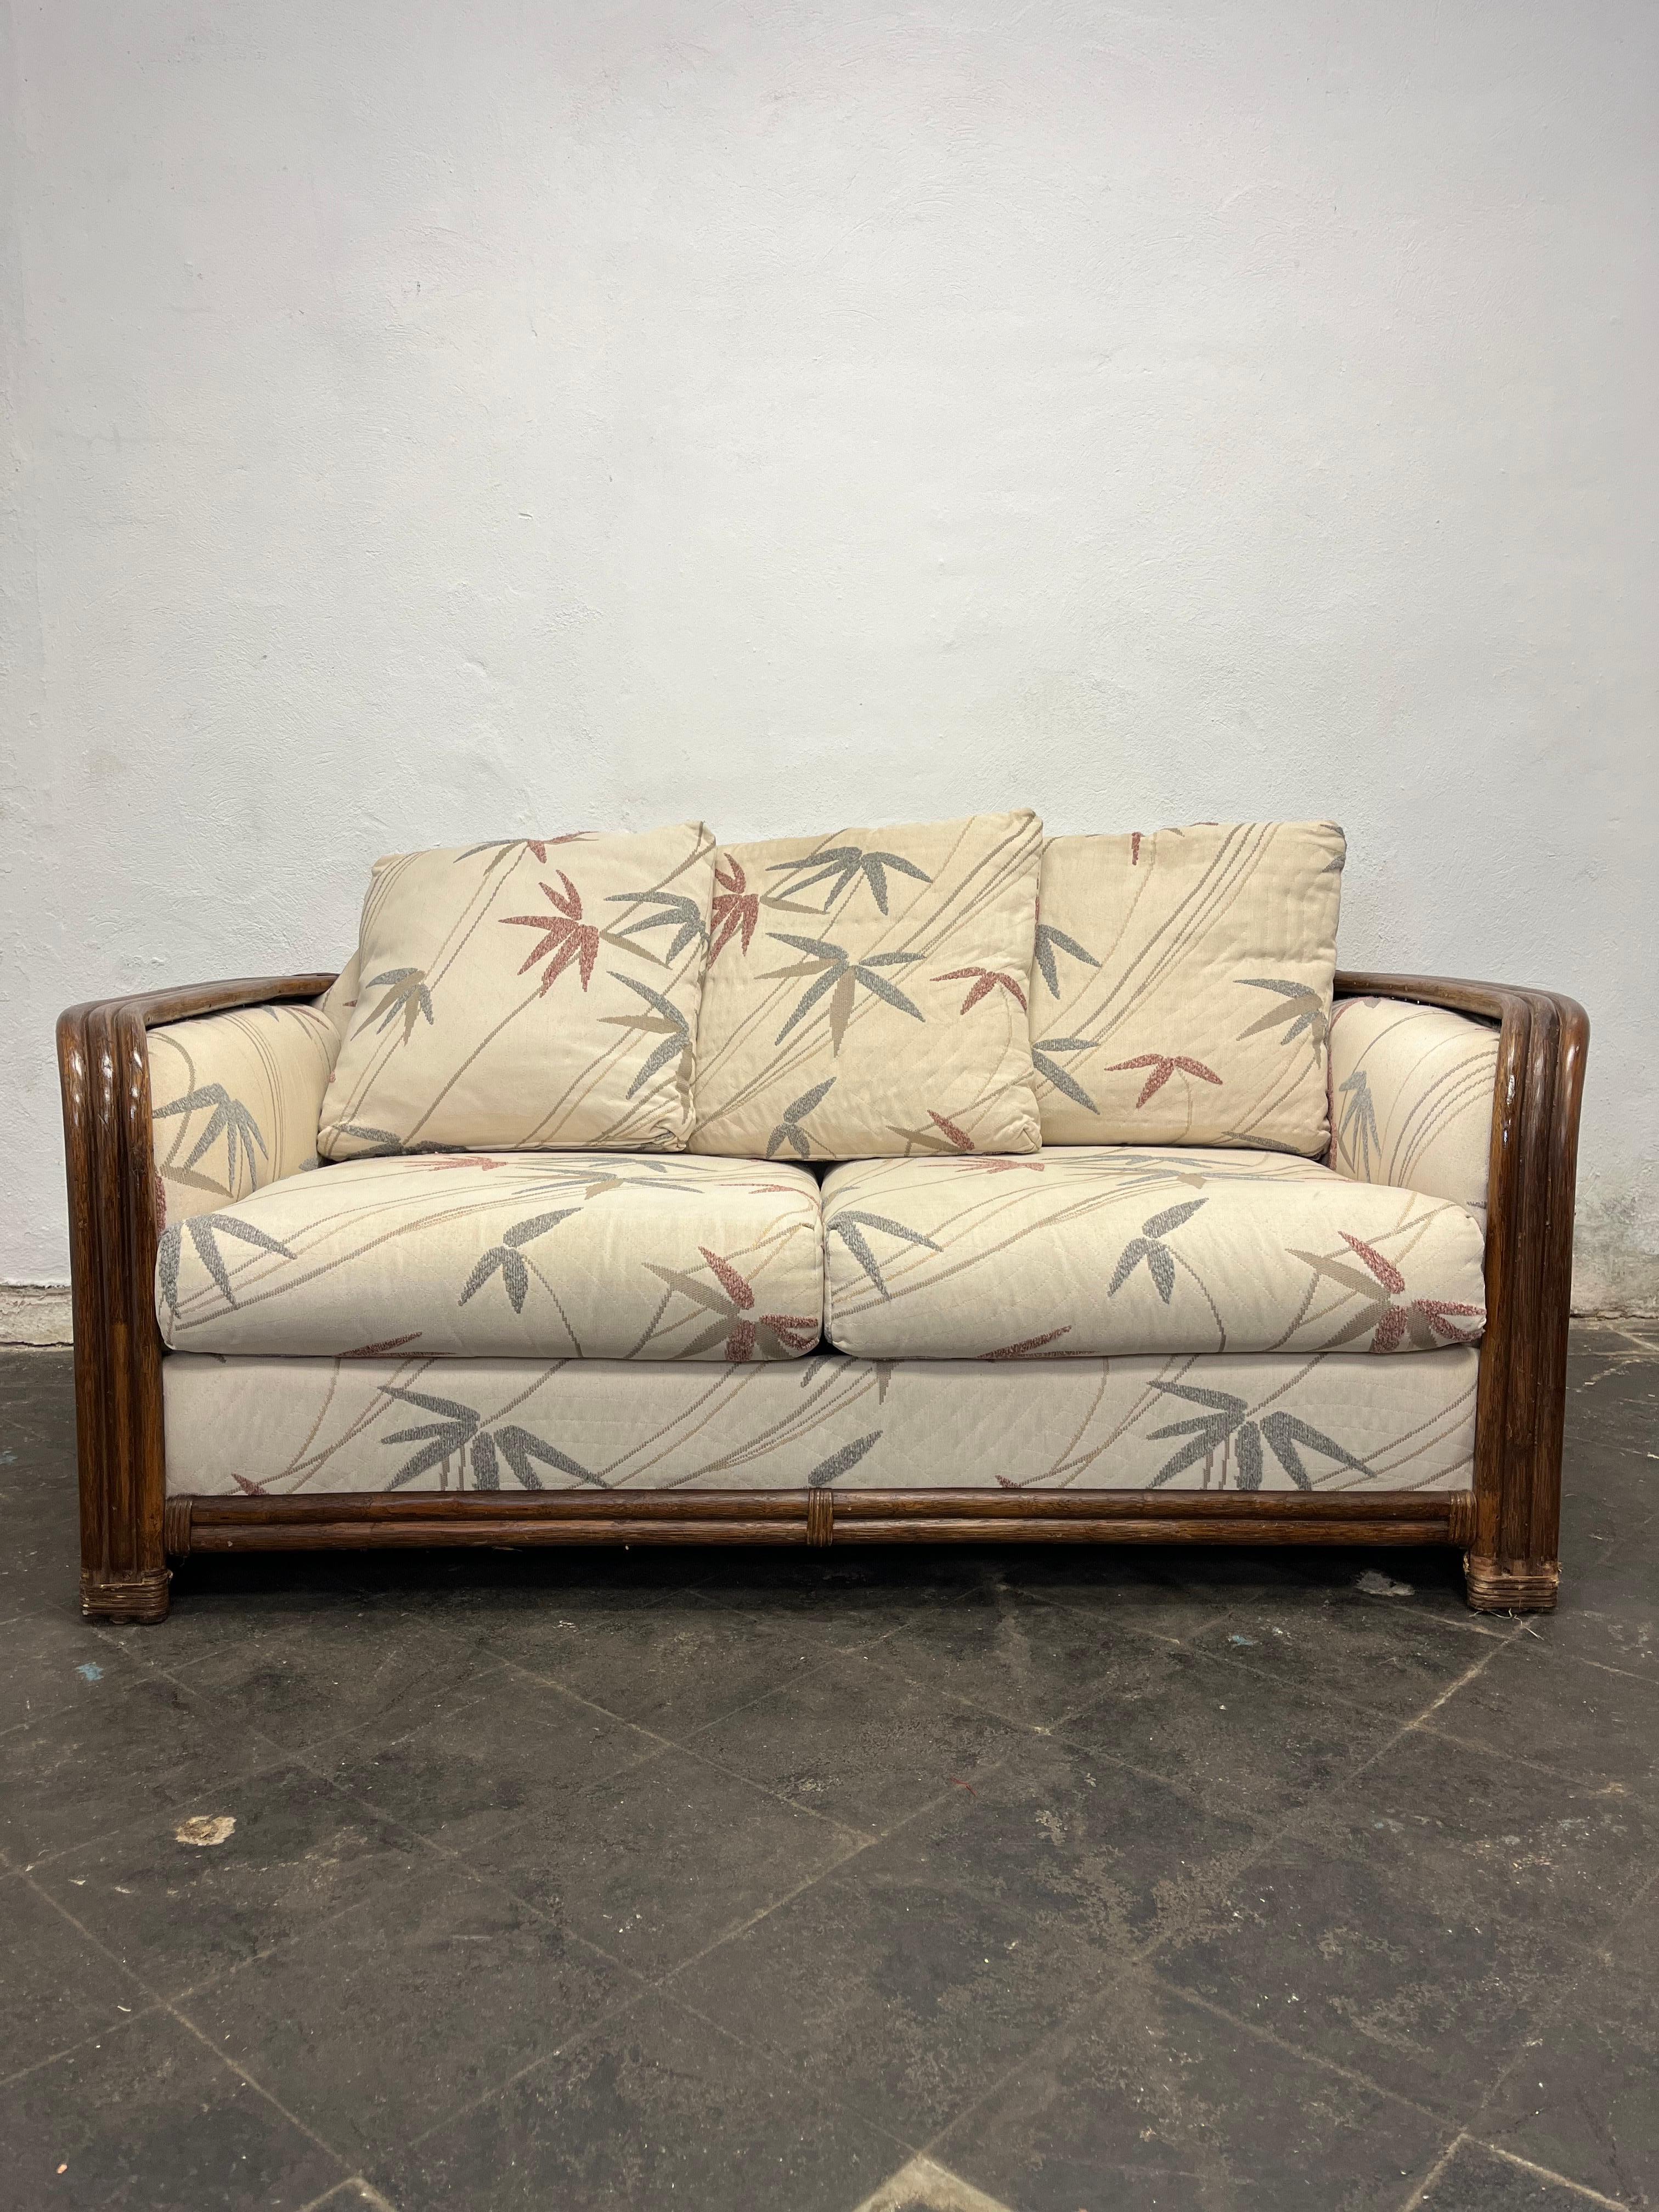 Flat fanned bamboo and rattan sofa with botanical upholstered seating and back. 
Curbside to NYC/Philly $400